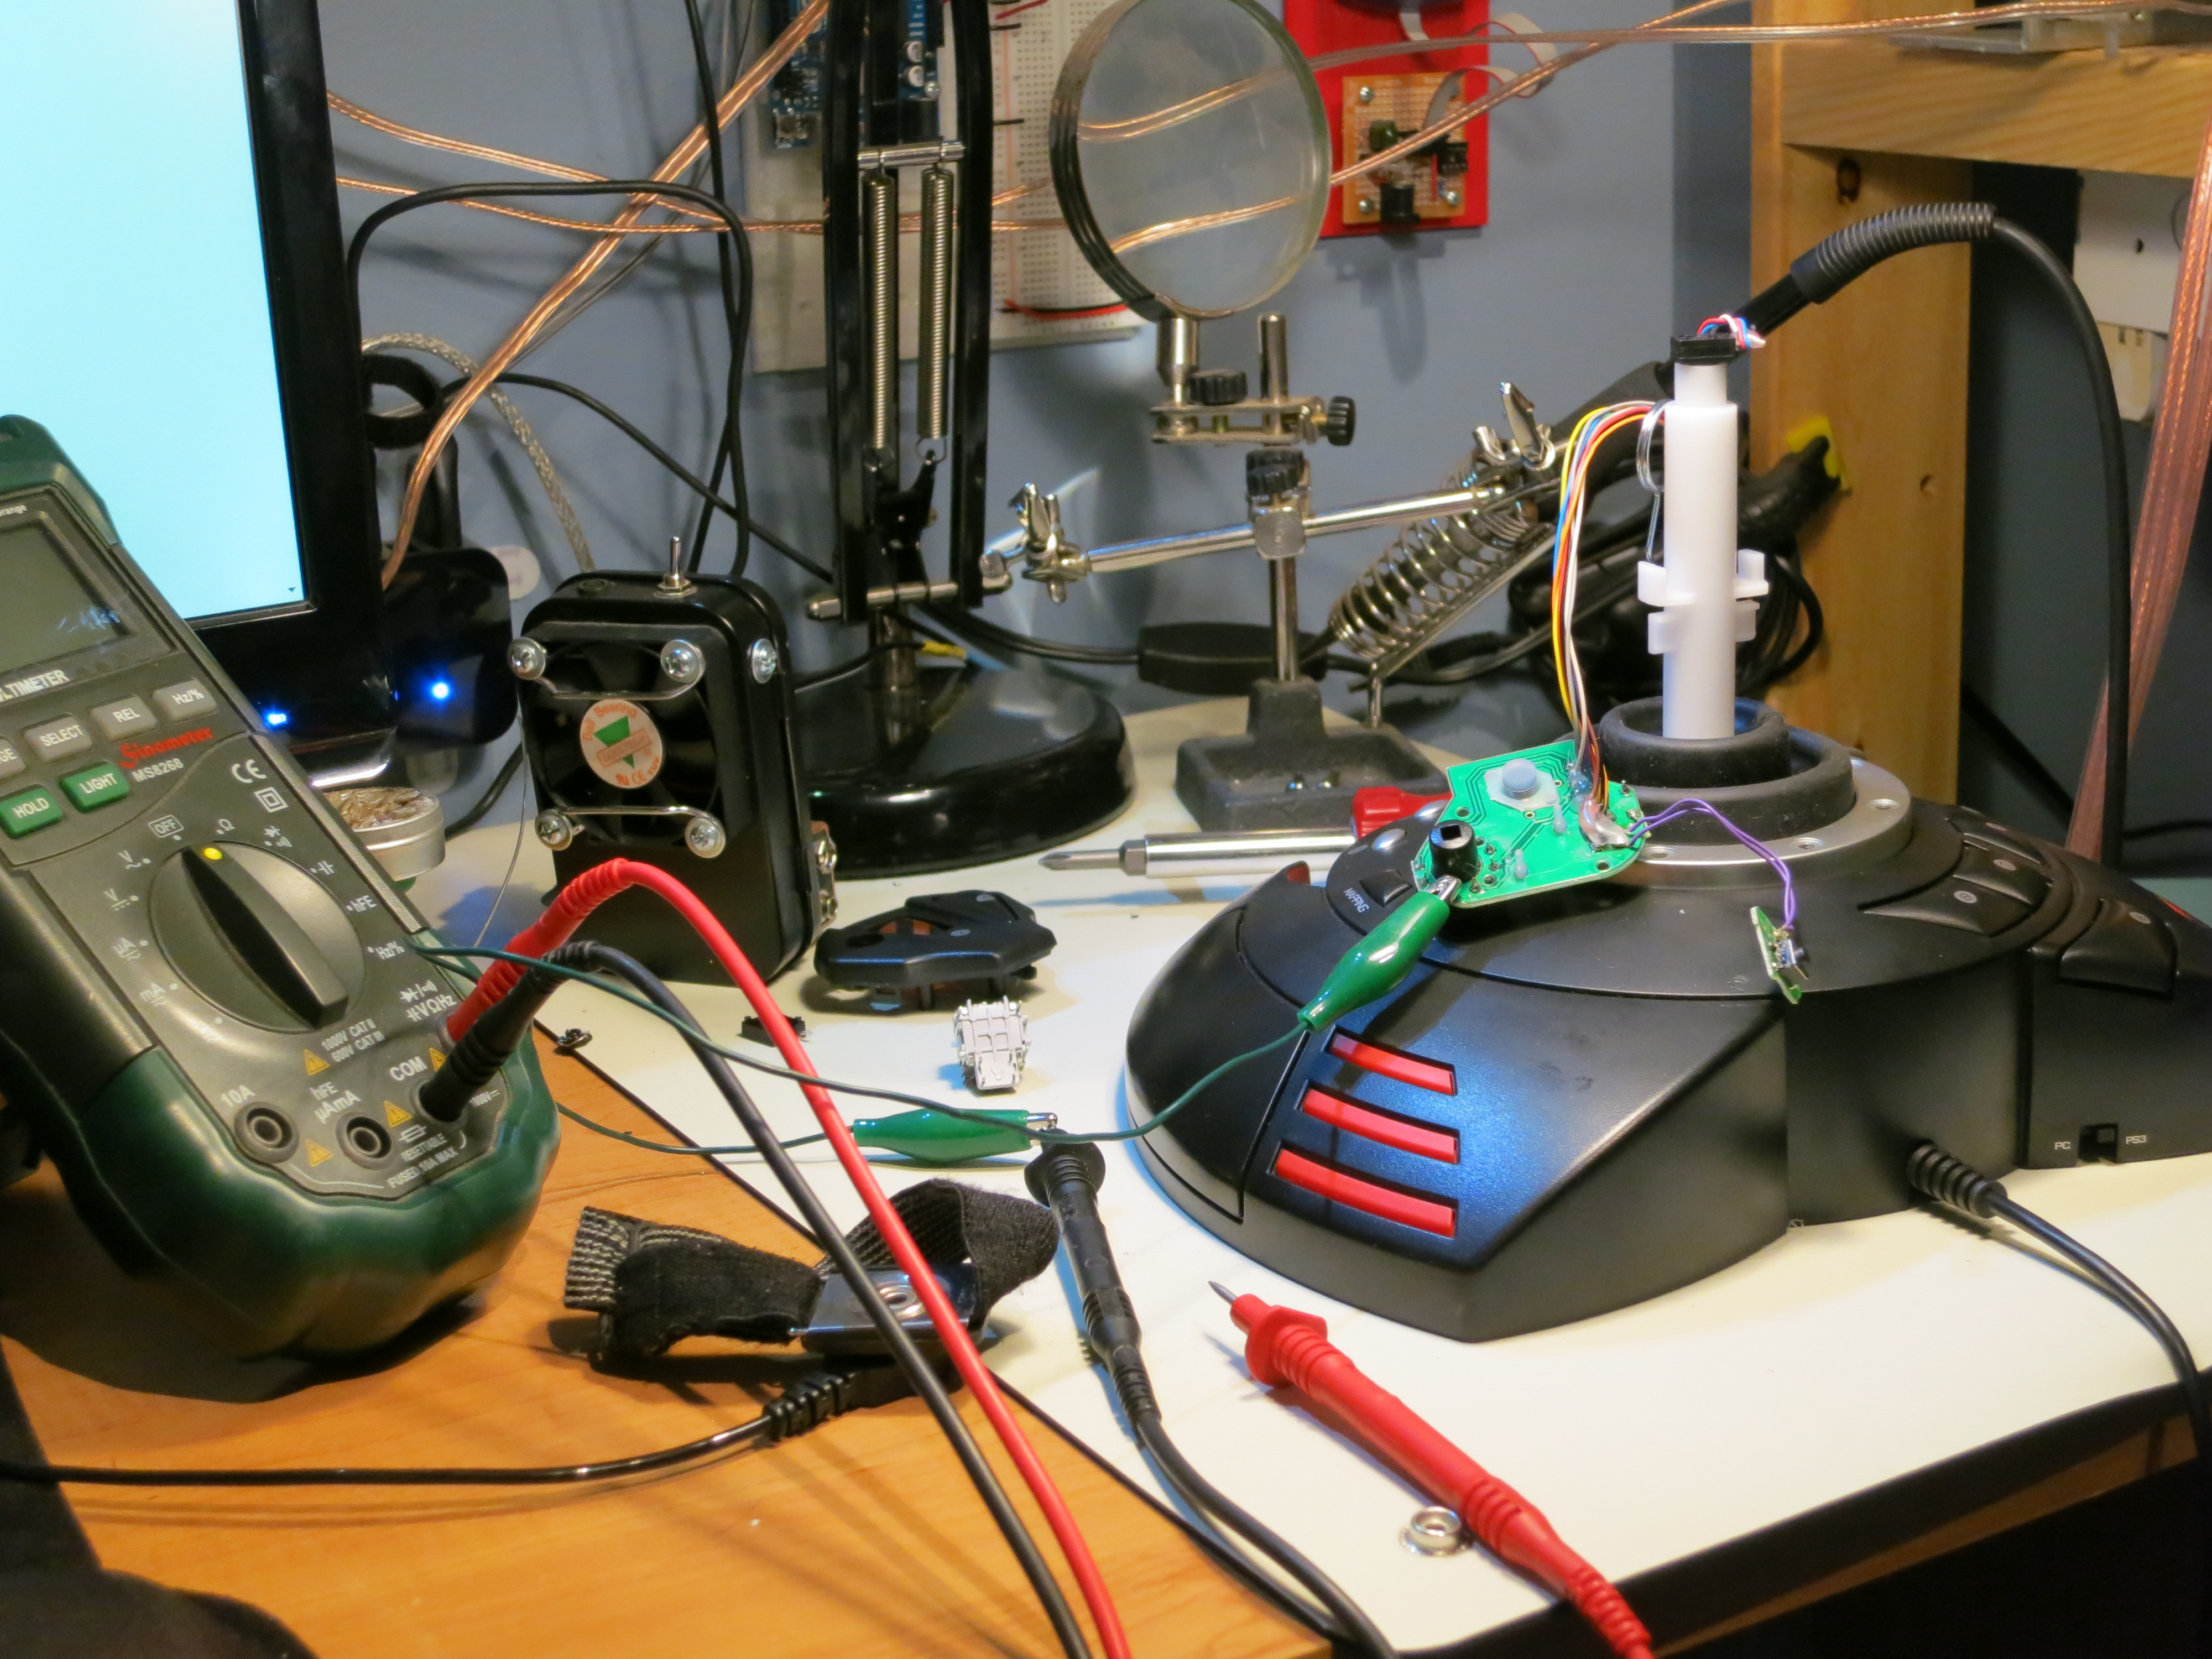 Flightstick / Joystick being modified for Xbox One controller